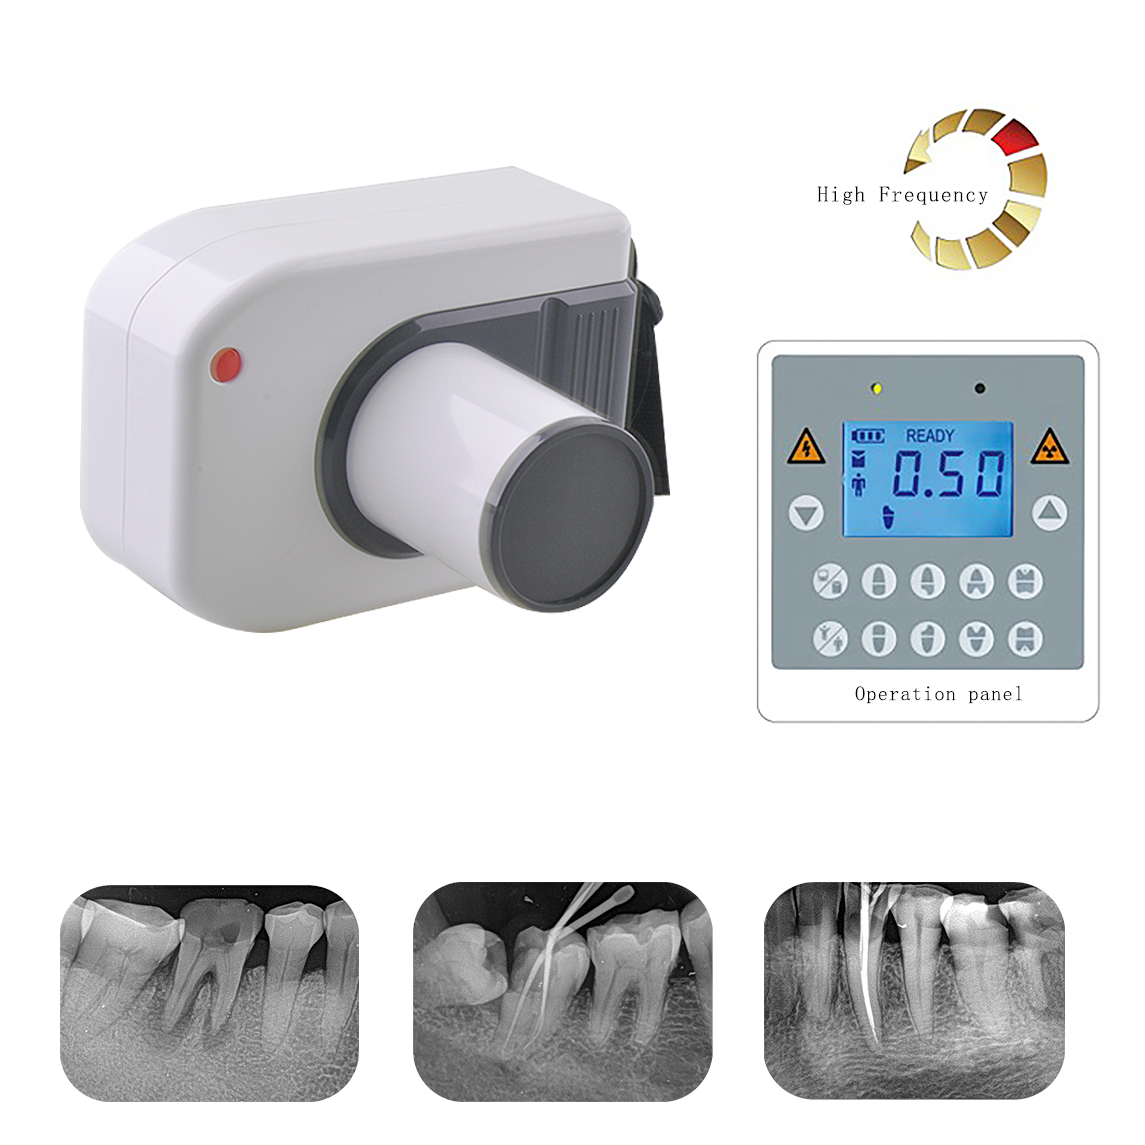 Dental Portable X-Ray - JYF-10P High Frequency DC Portable Dental X-ray Unit - Portable Dental X-rays In Pakistan